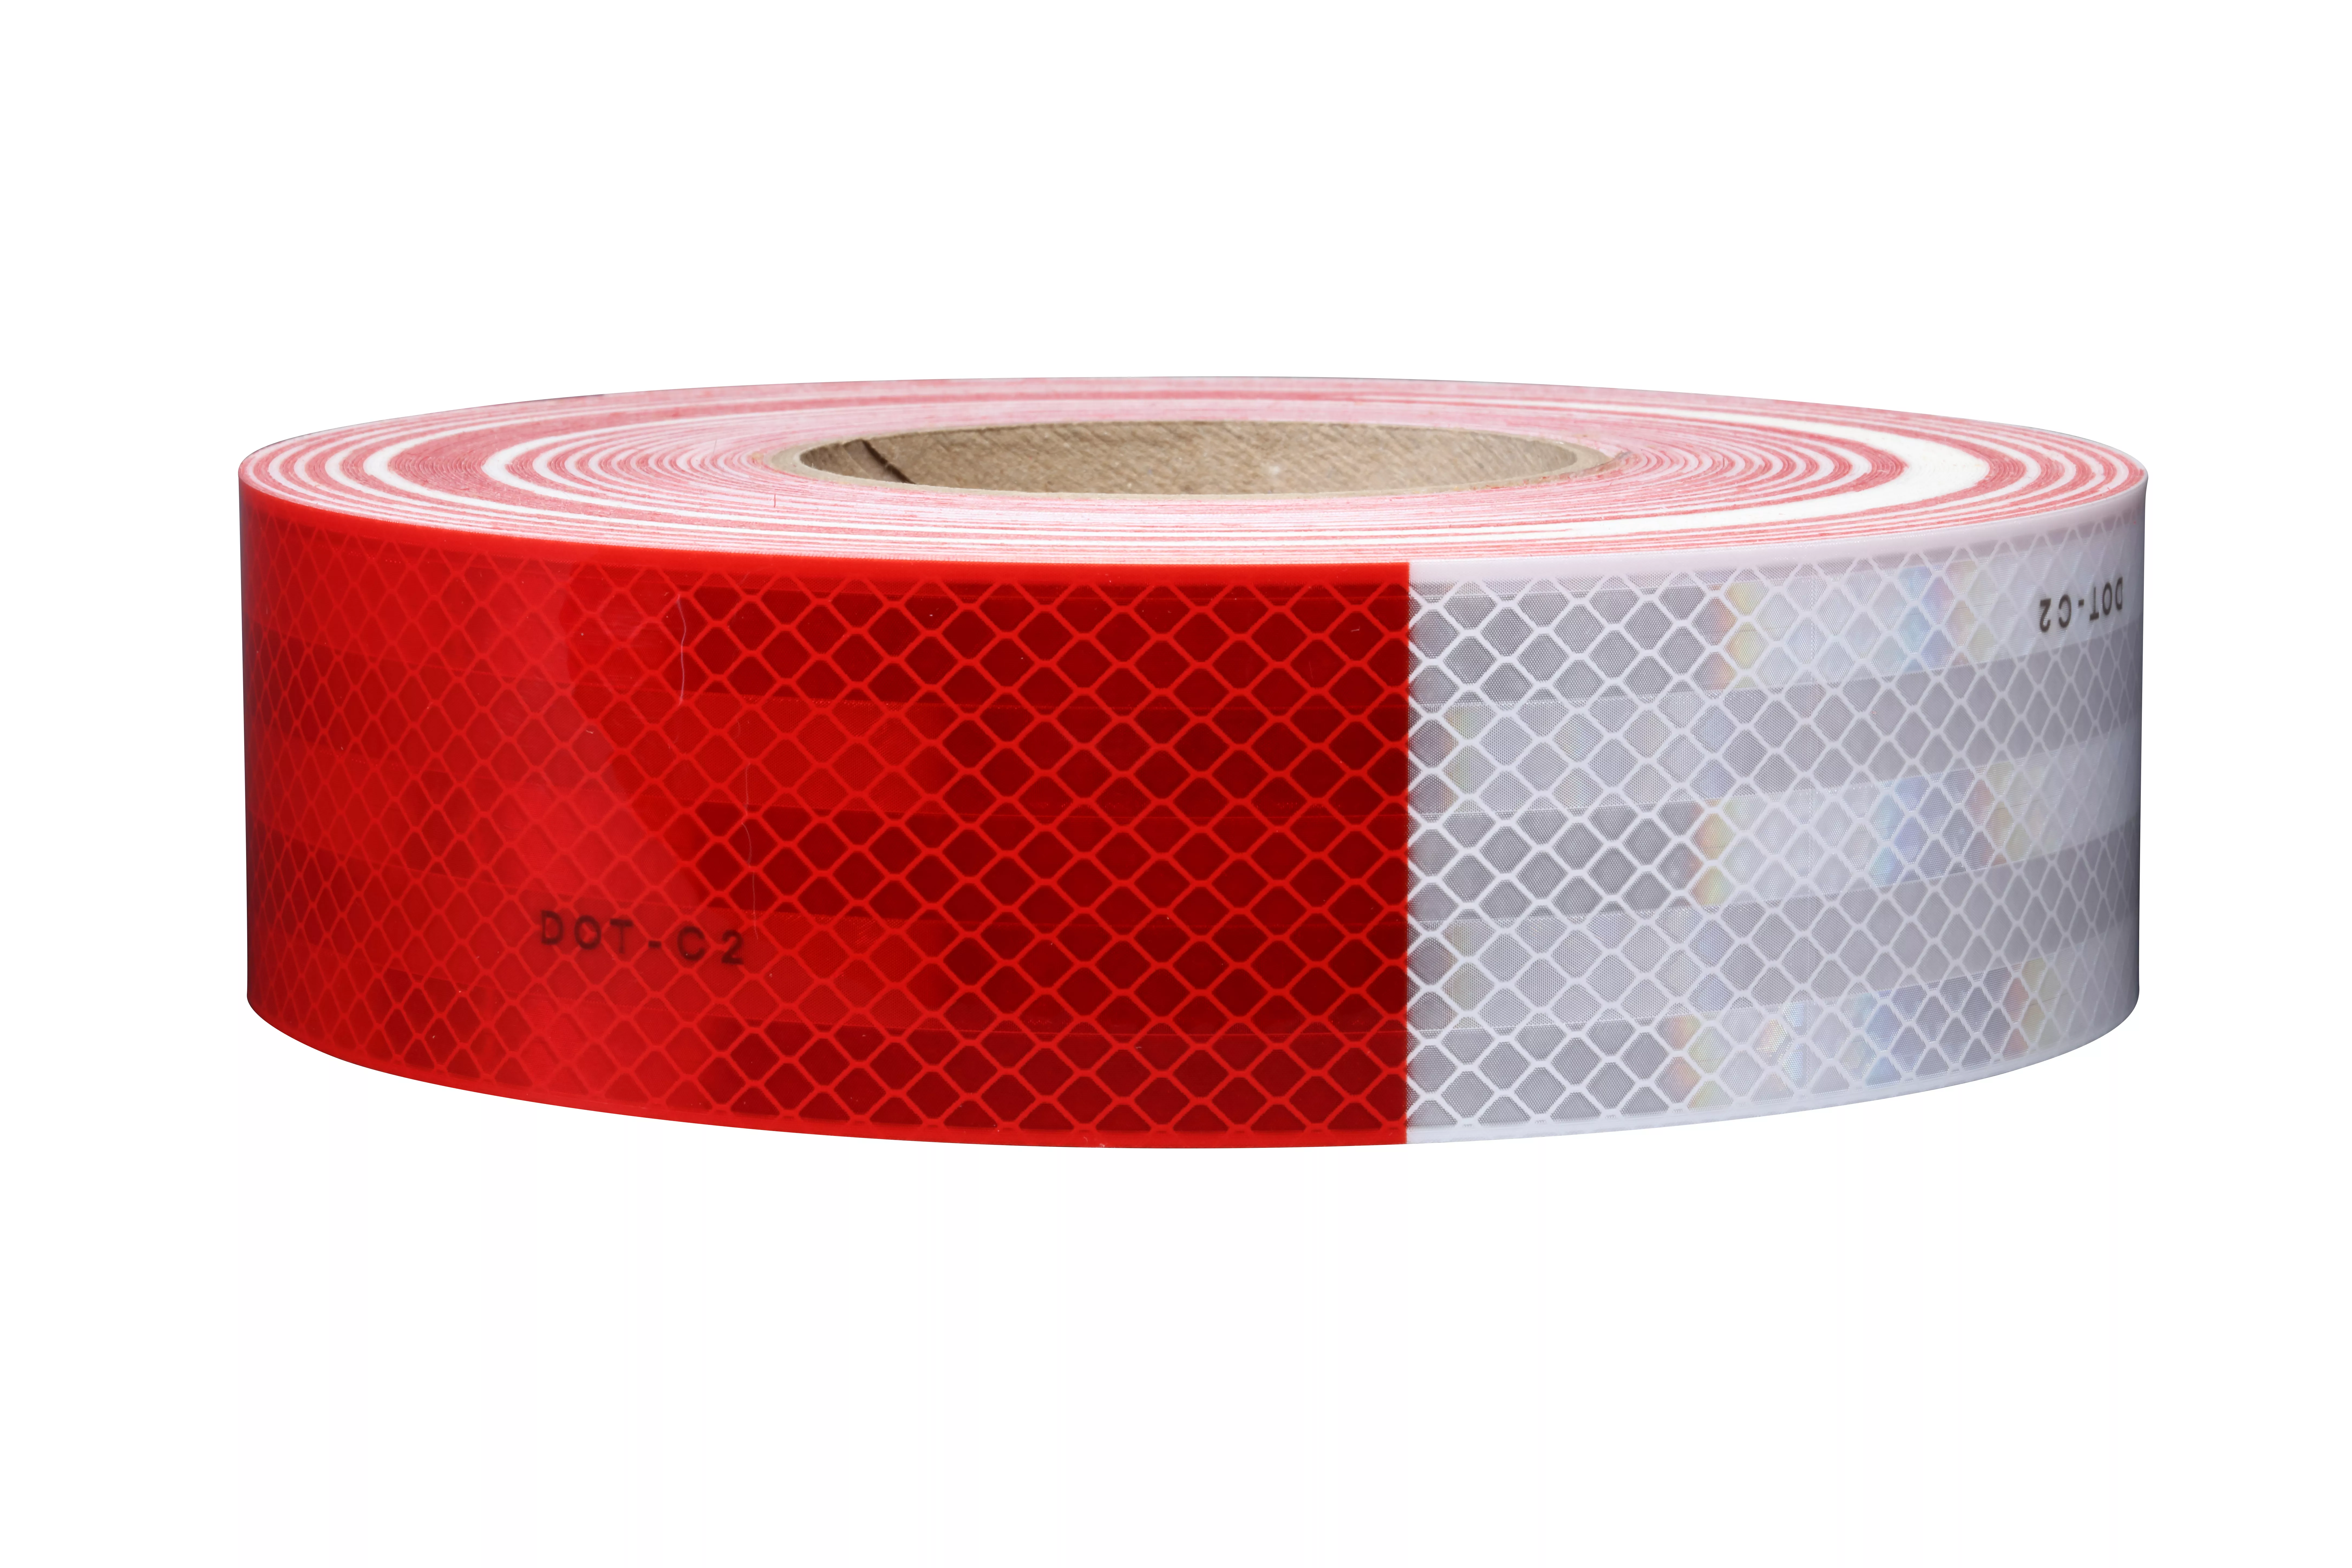 3M™ Diamond Grade™ Conspicuity Marking 983-32, Red/White, 2 in x 50 yd,
Kiss Cut every 18 in, 6 Rolls/Carton